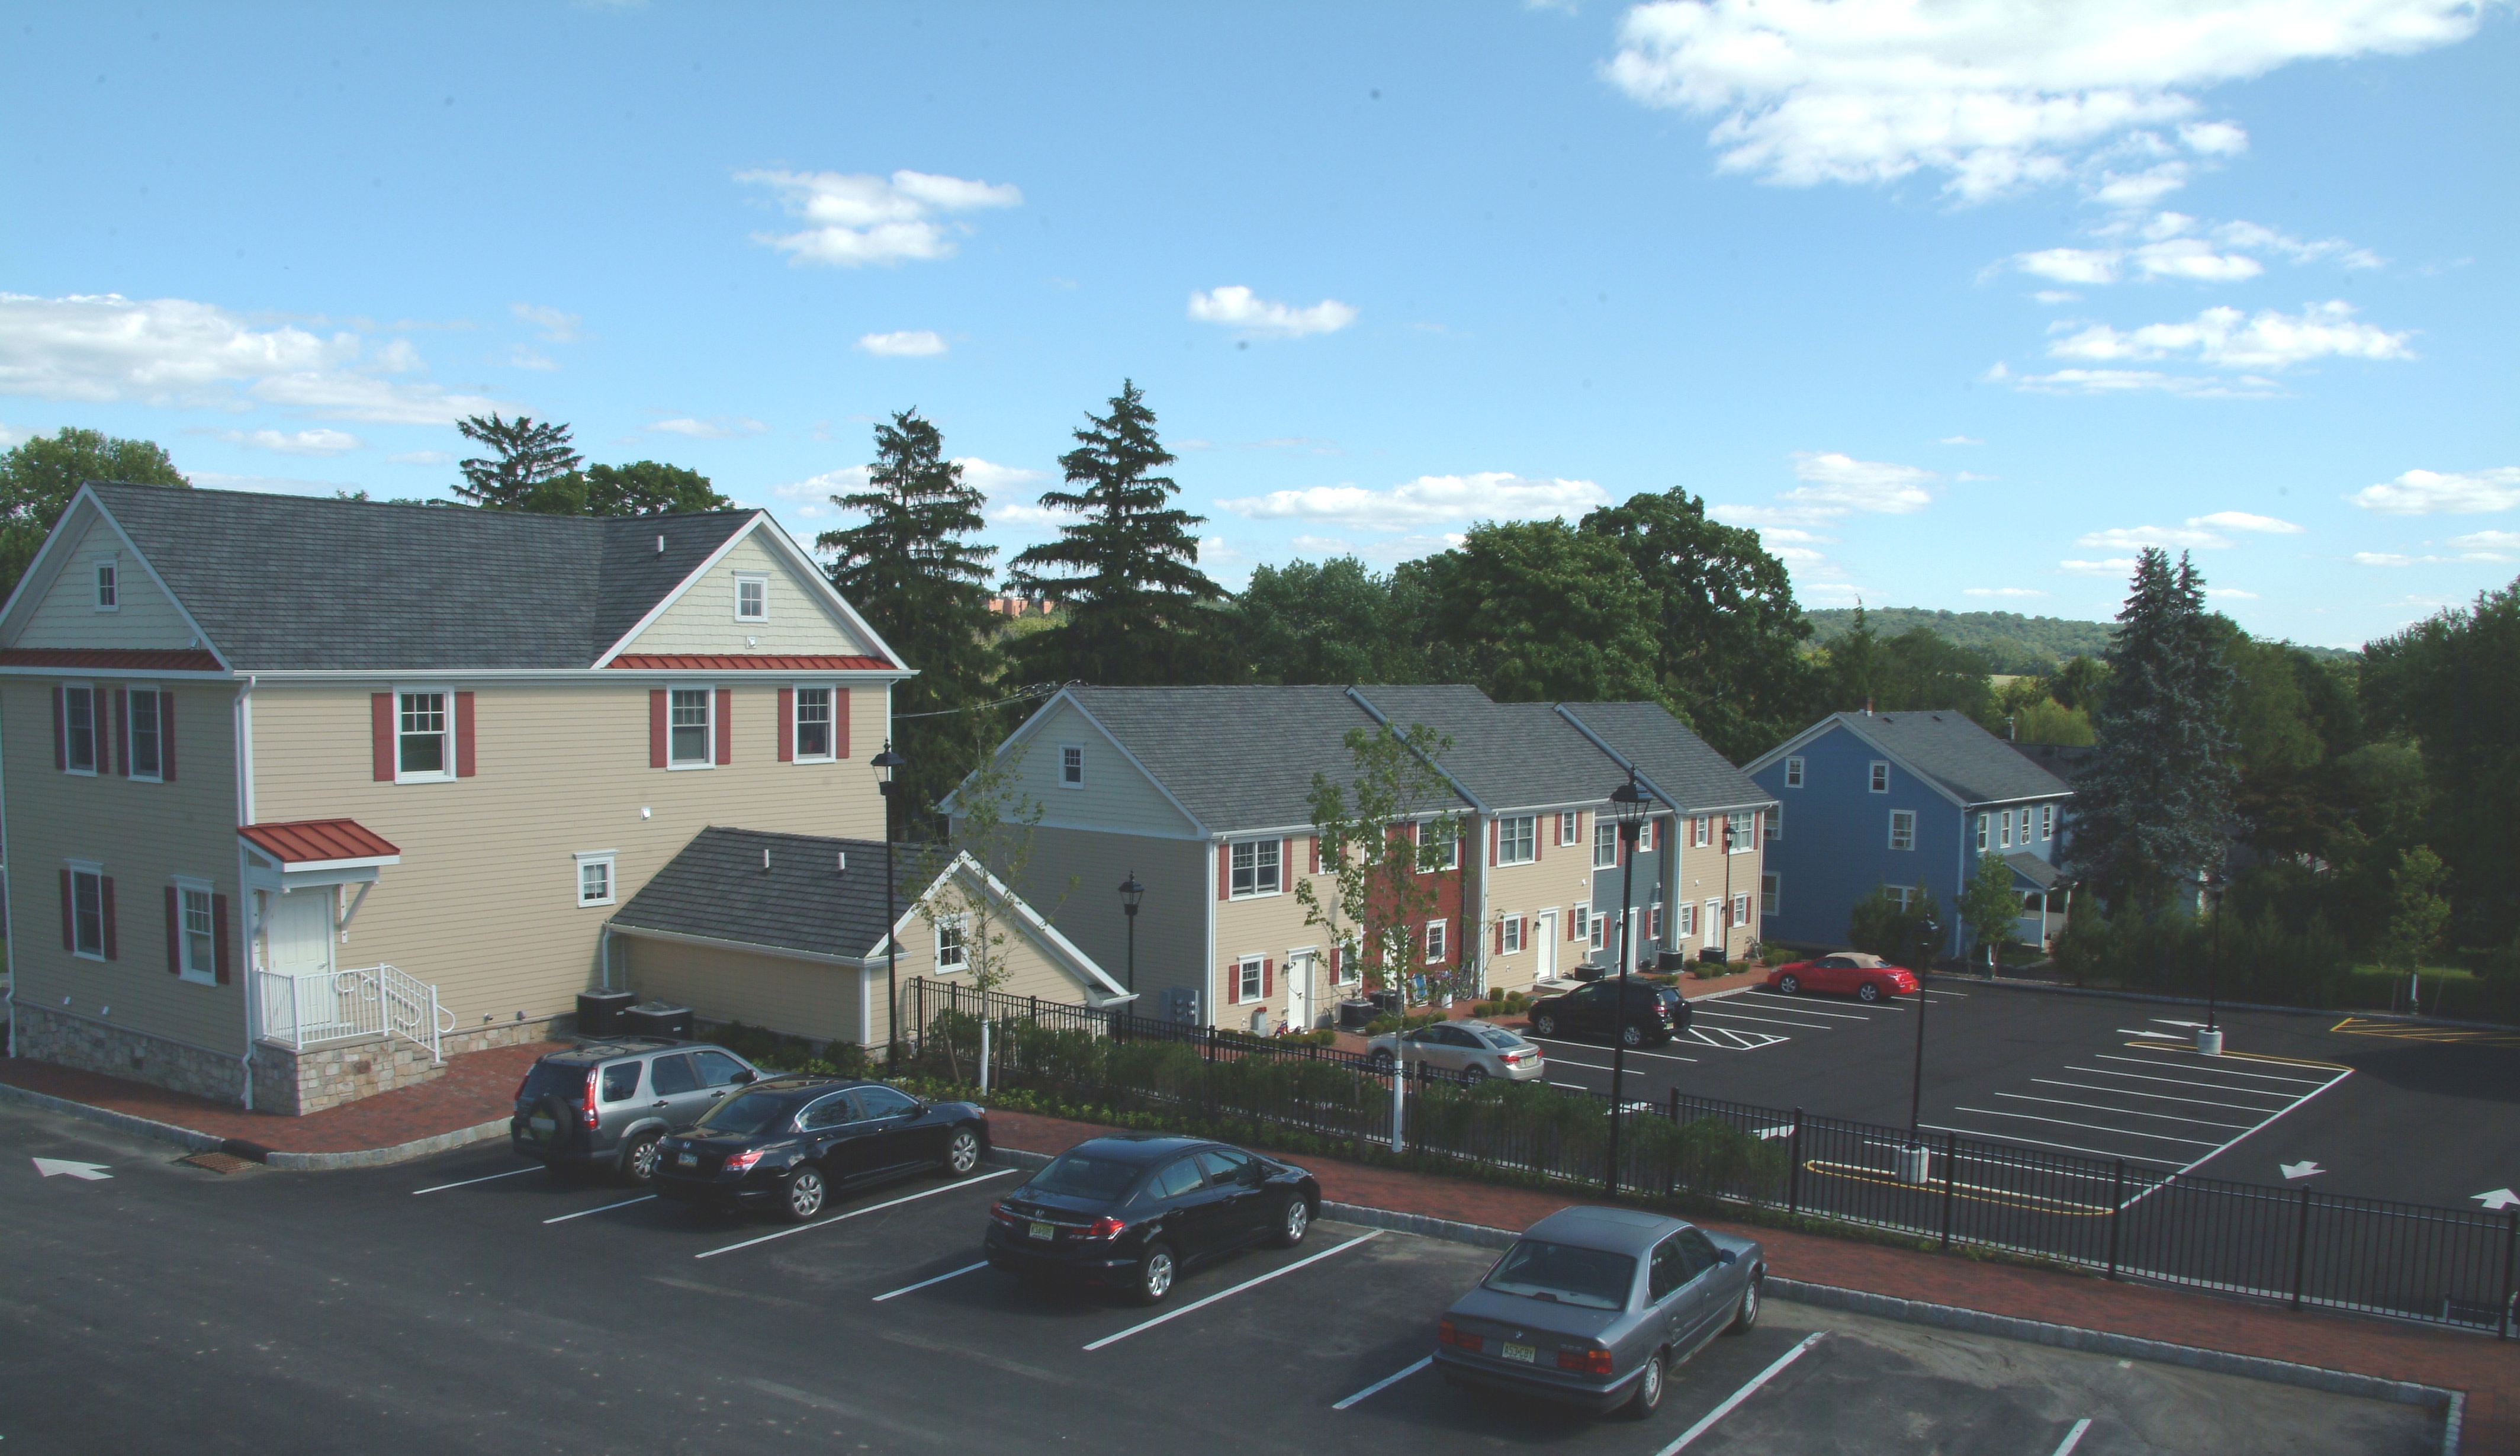 The Village Green at Annandale is New Jersey's first all-solar powered mixed-use development.